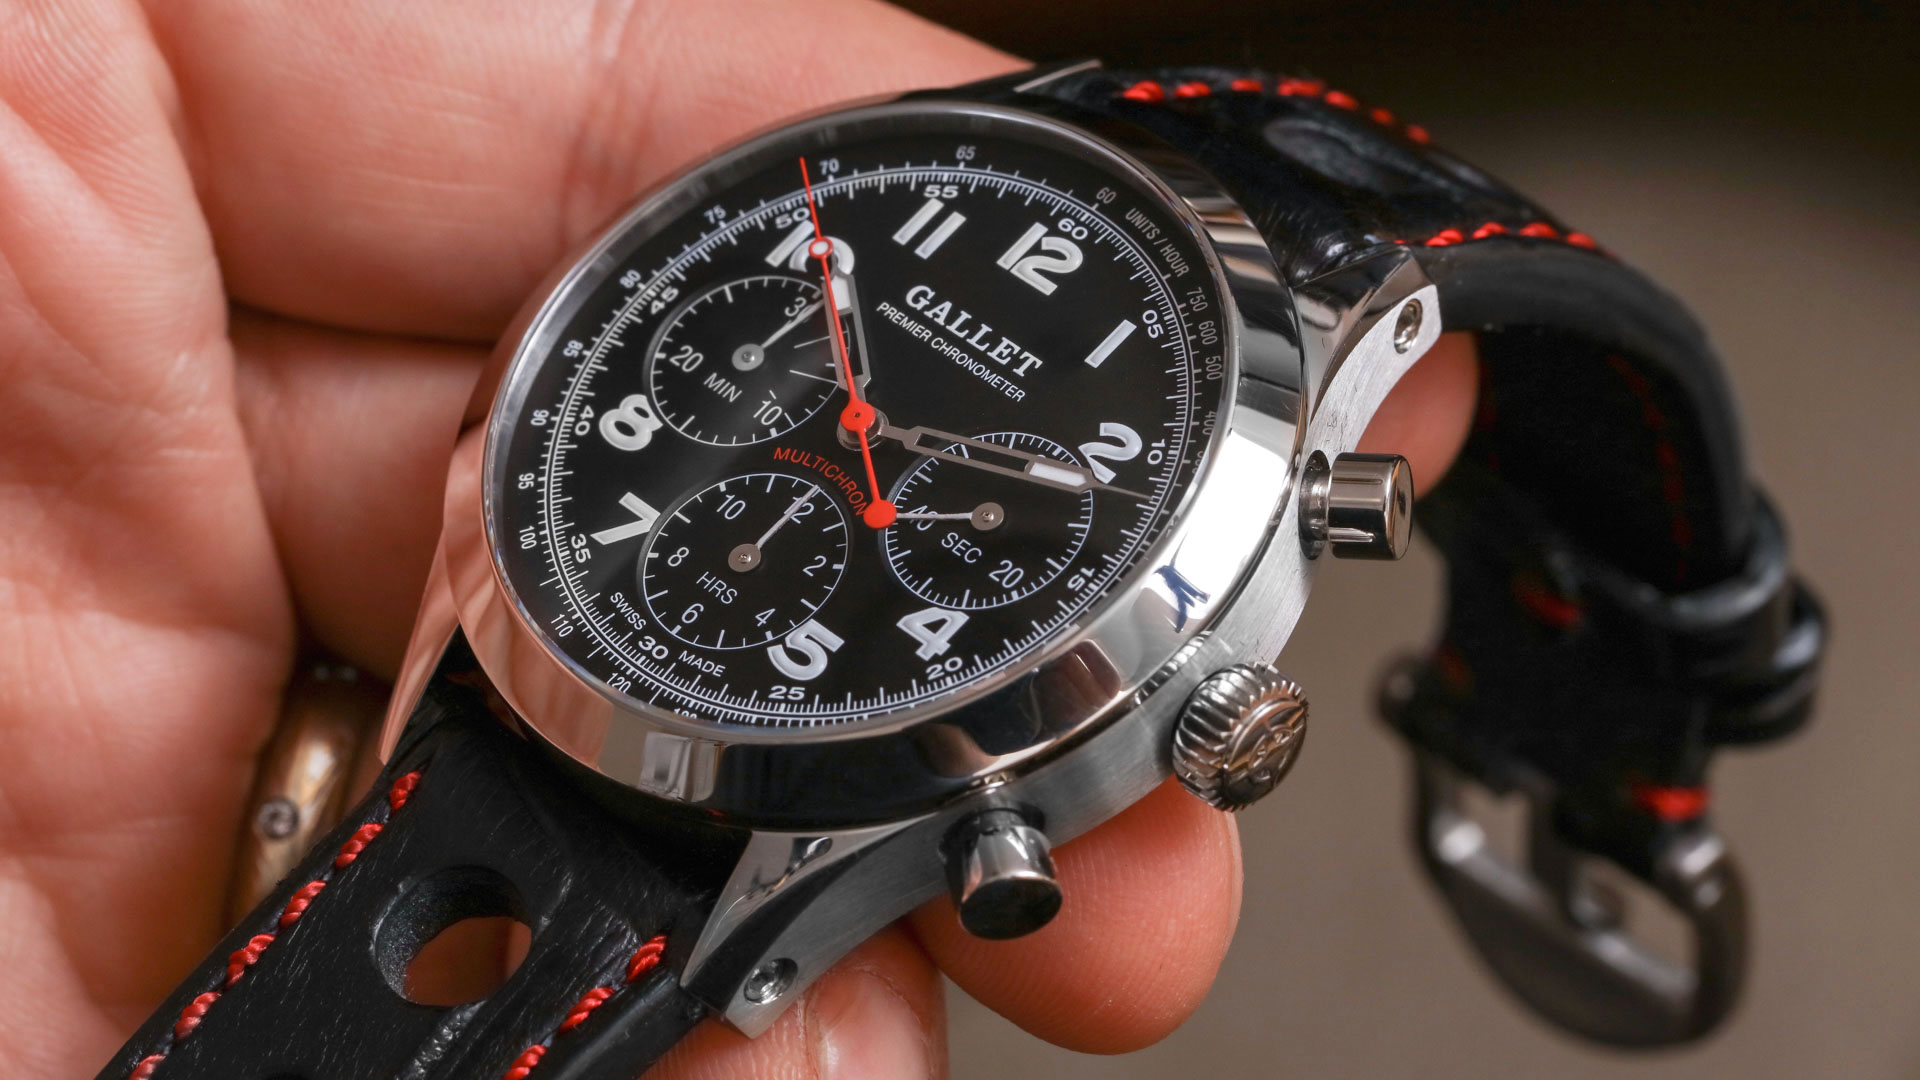 Gallet Racing Heritage Chronograph Watch Review